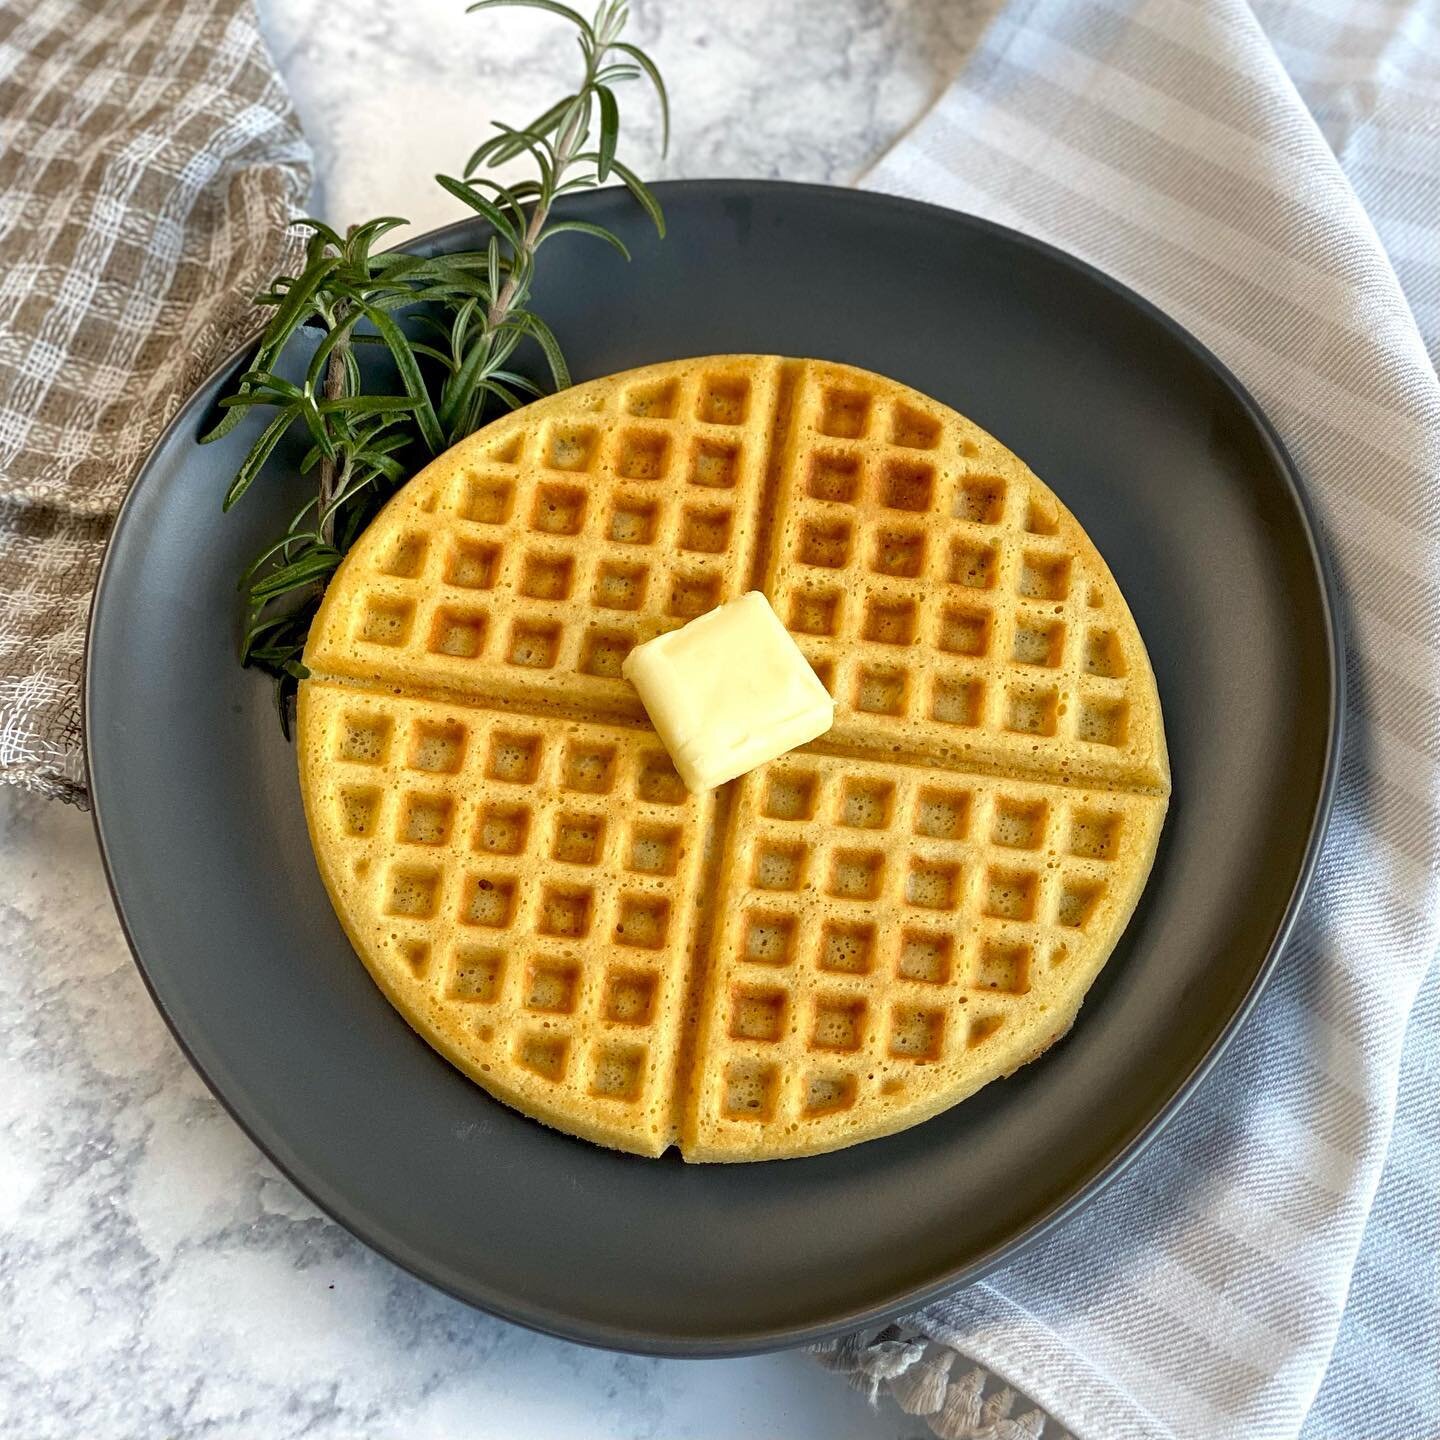 🌼 Are you going to treat Mom to a delightful breakfast in bed? 
.
✅ THIS is the perfect recipe for a gluten-free and lectin-free treat: Cassava Flour Waffles! 
..
🎉Let's sprinkle some extra love and sweetness into the air as we celebrate the remark